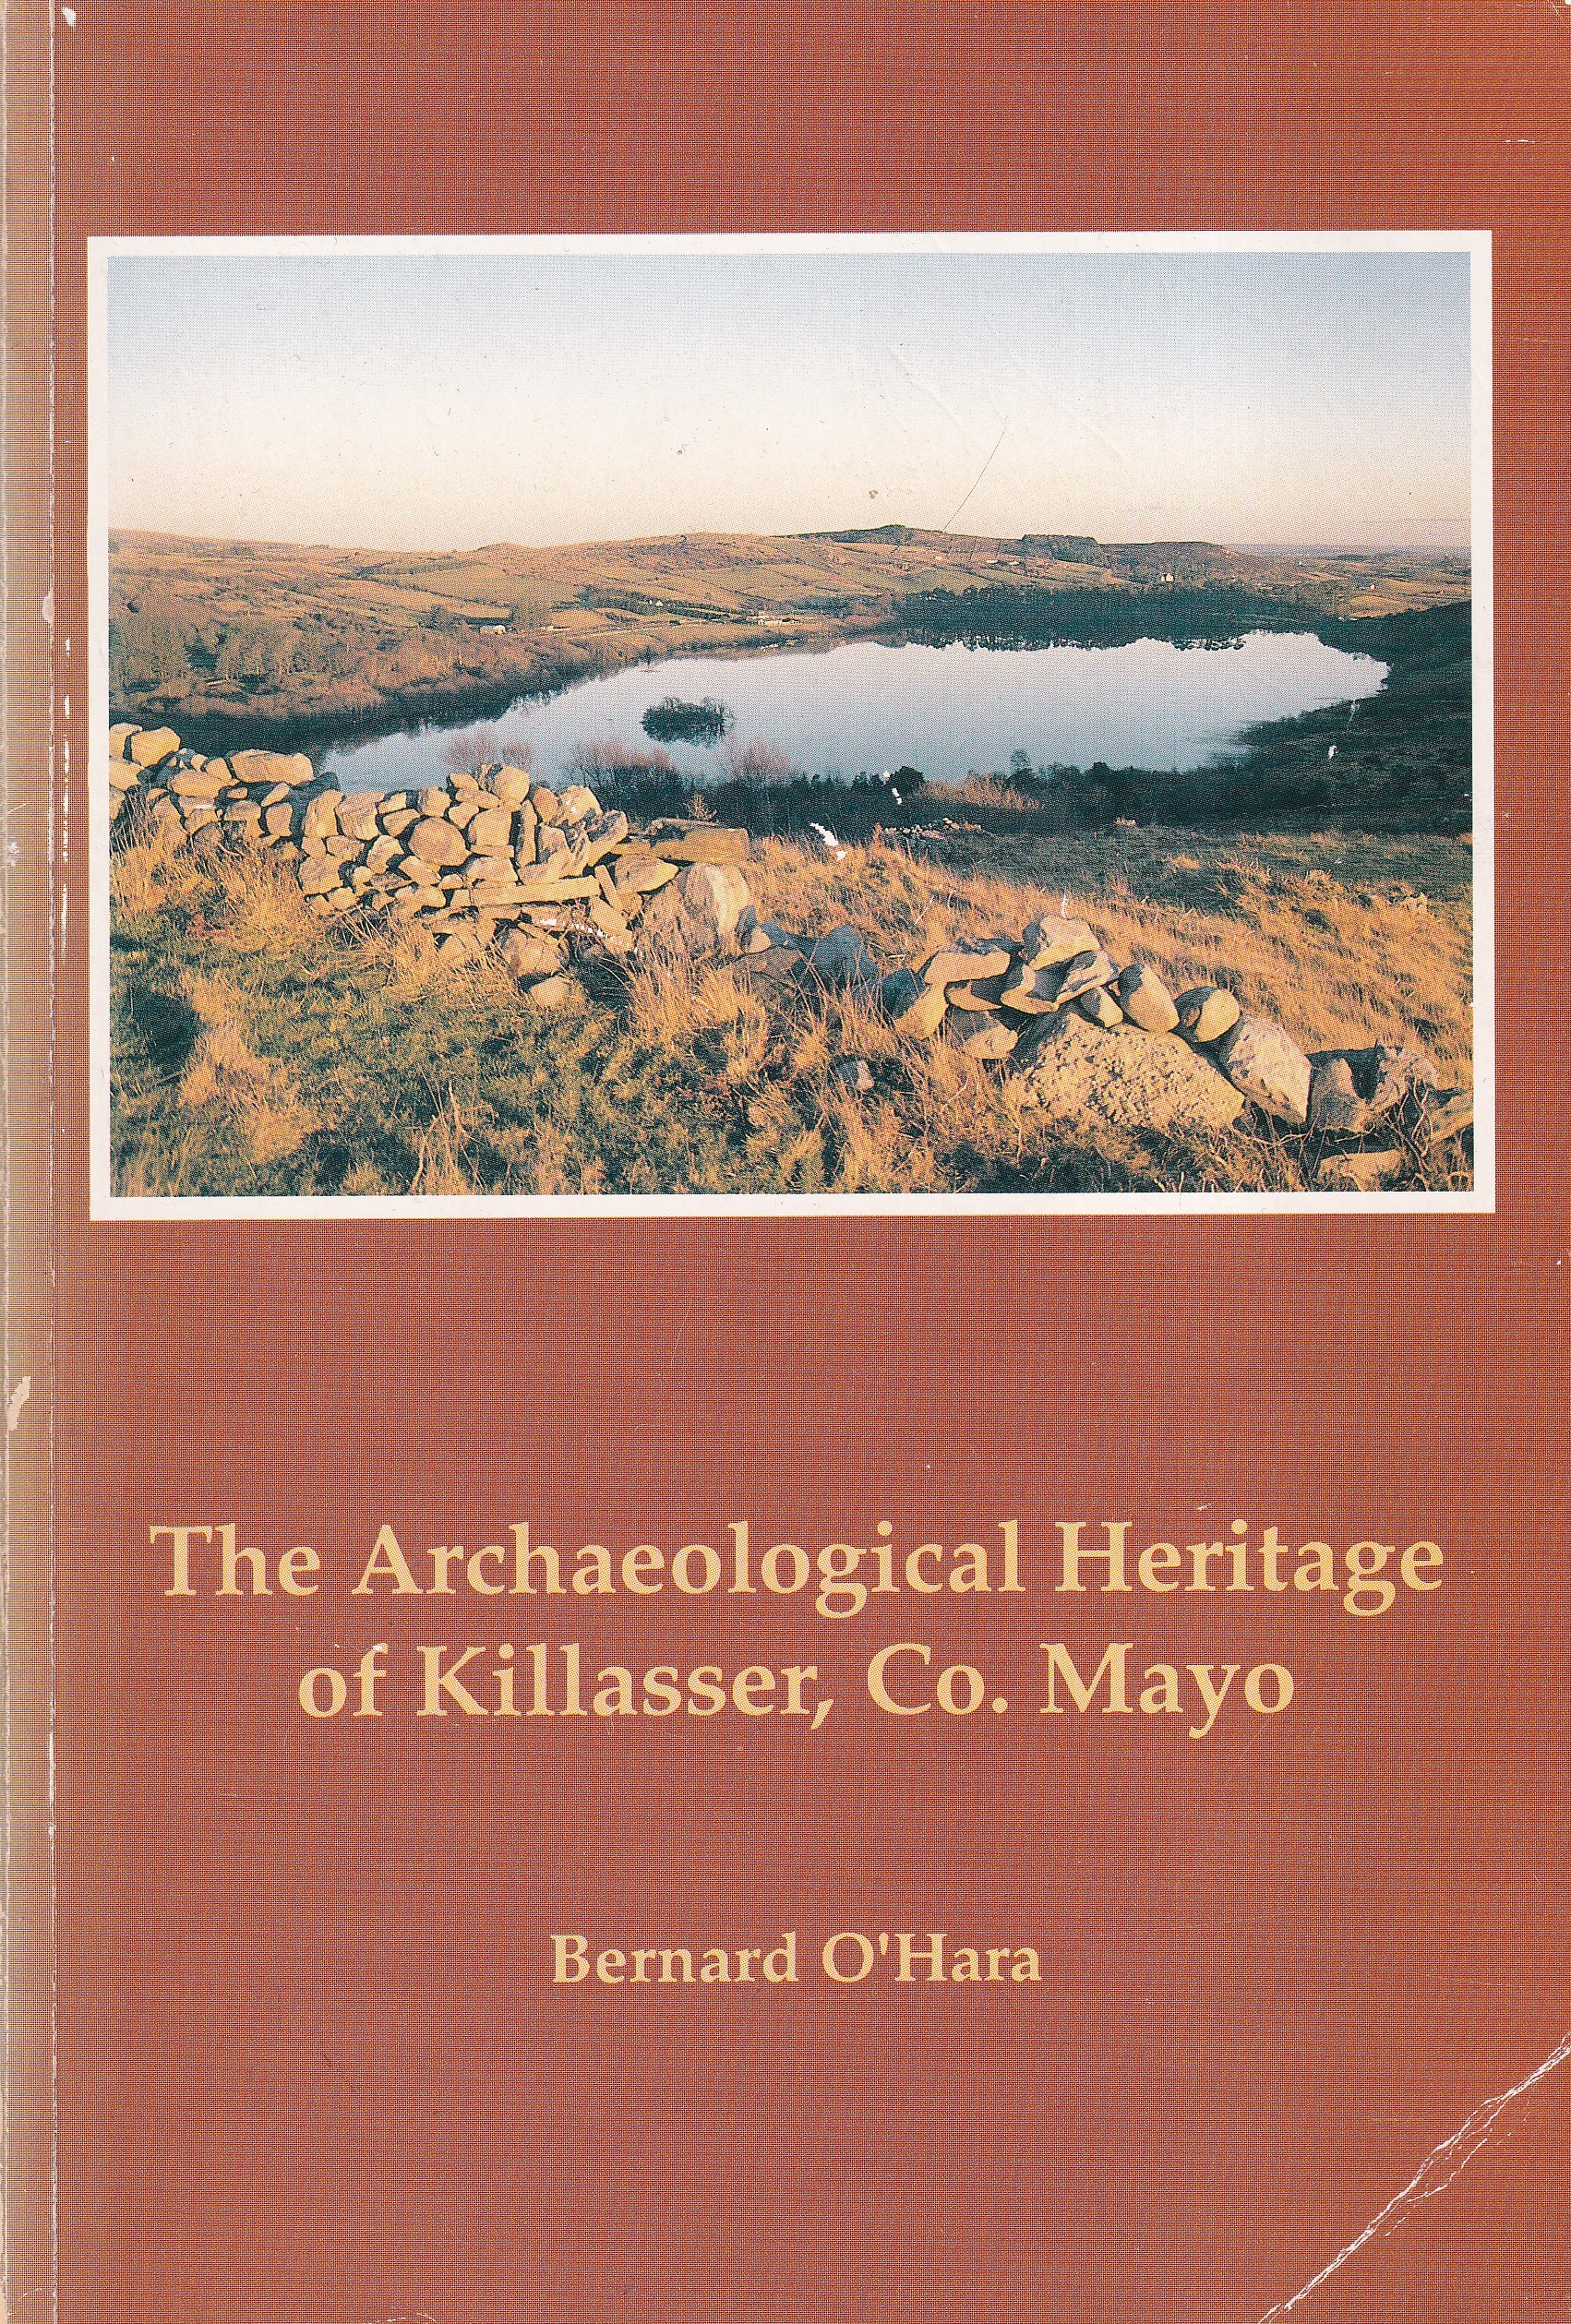 The Archaeological Heritage of Killasser, Co. Mayo- Signed by Bernard O'Hara